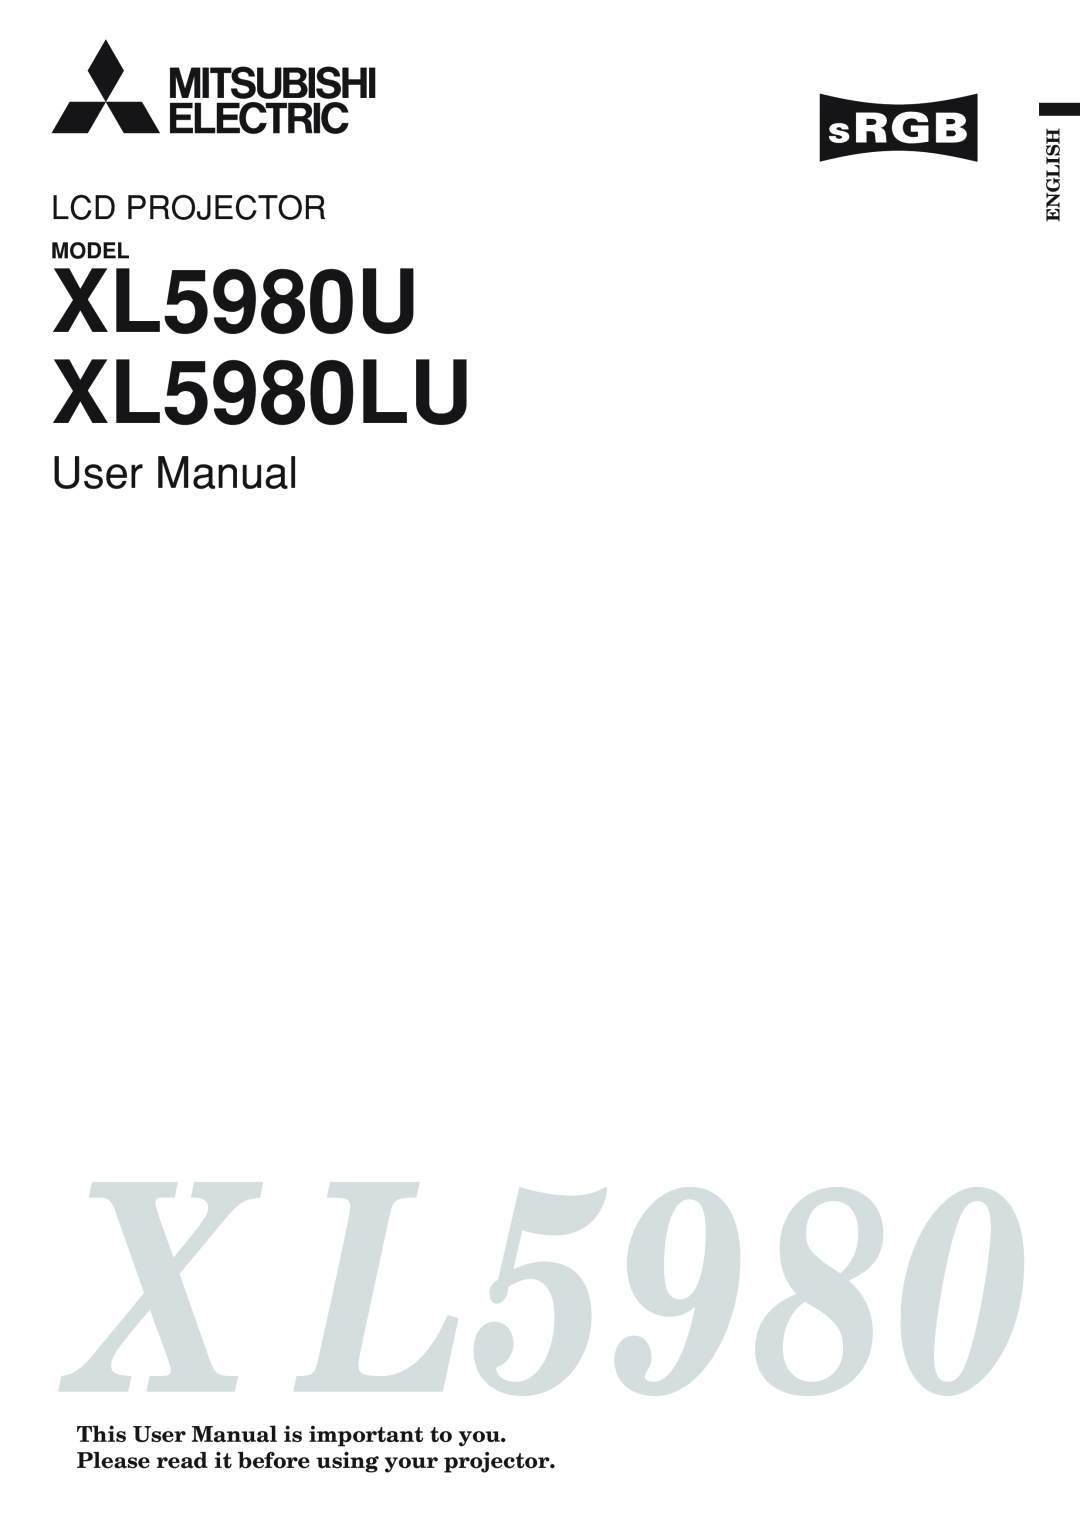 Mitsubishi Electronics user manual This User Manual is important to you, X L5980, XL5980U XL5980LU, Lcd Projector 